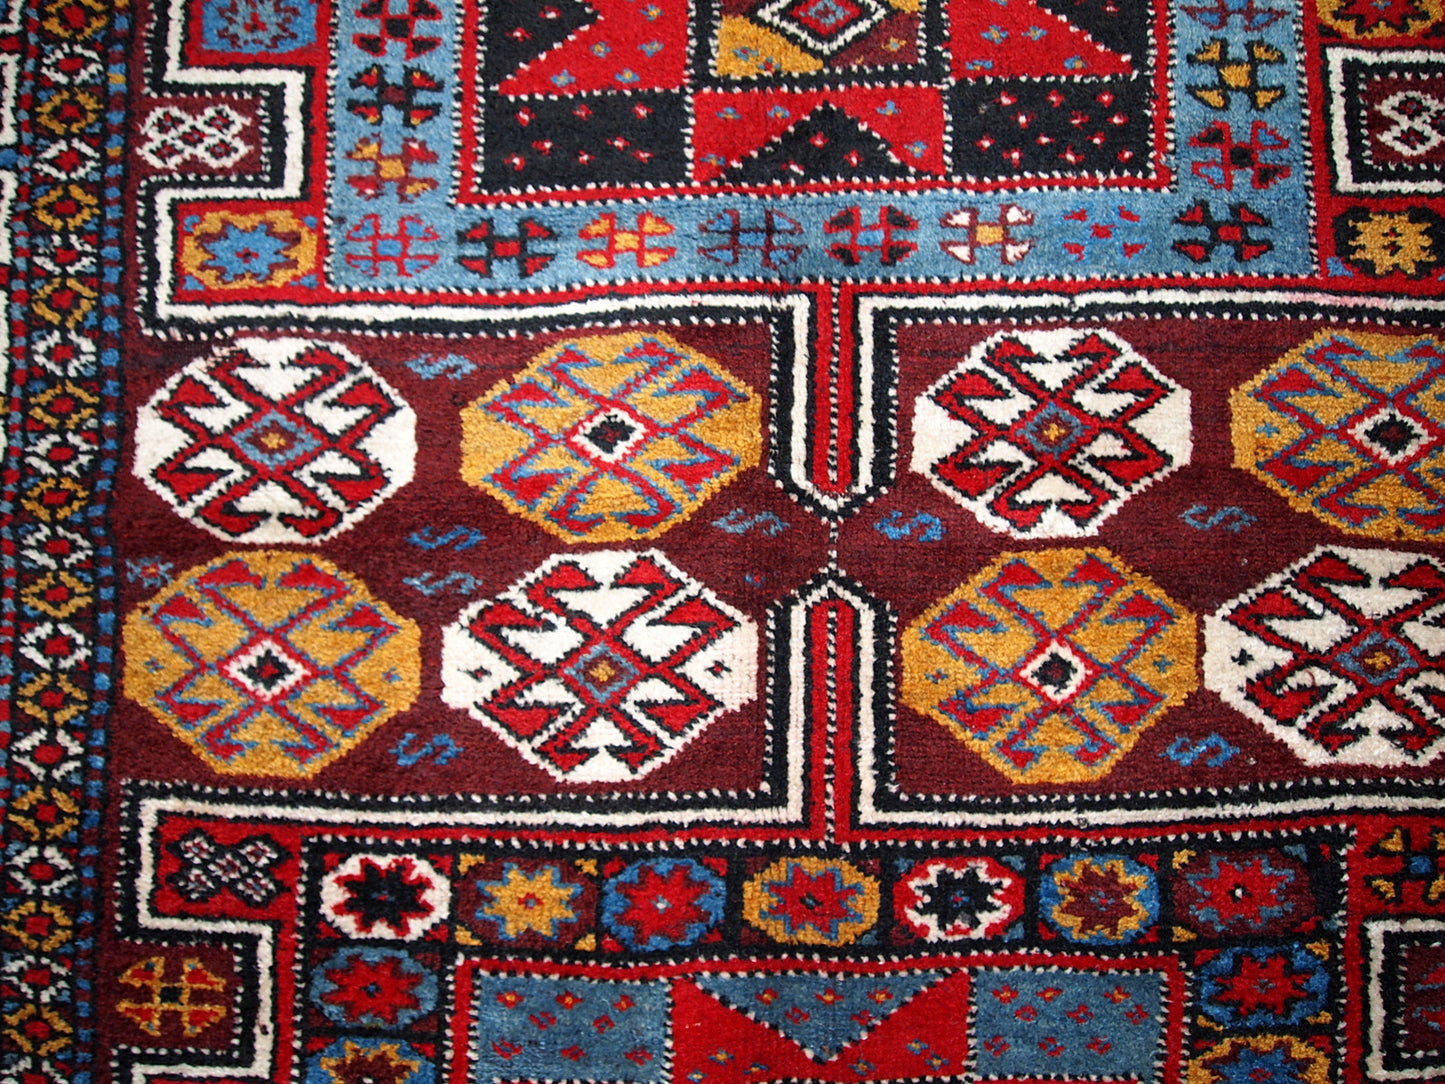 Antique Persian Kurdish rug in deep burgundy color with some golden, white and sky blue shades. This rug is in original good condition.